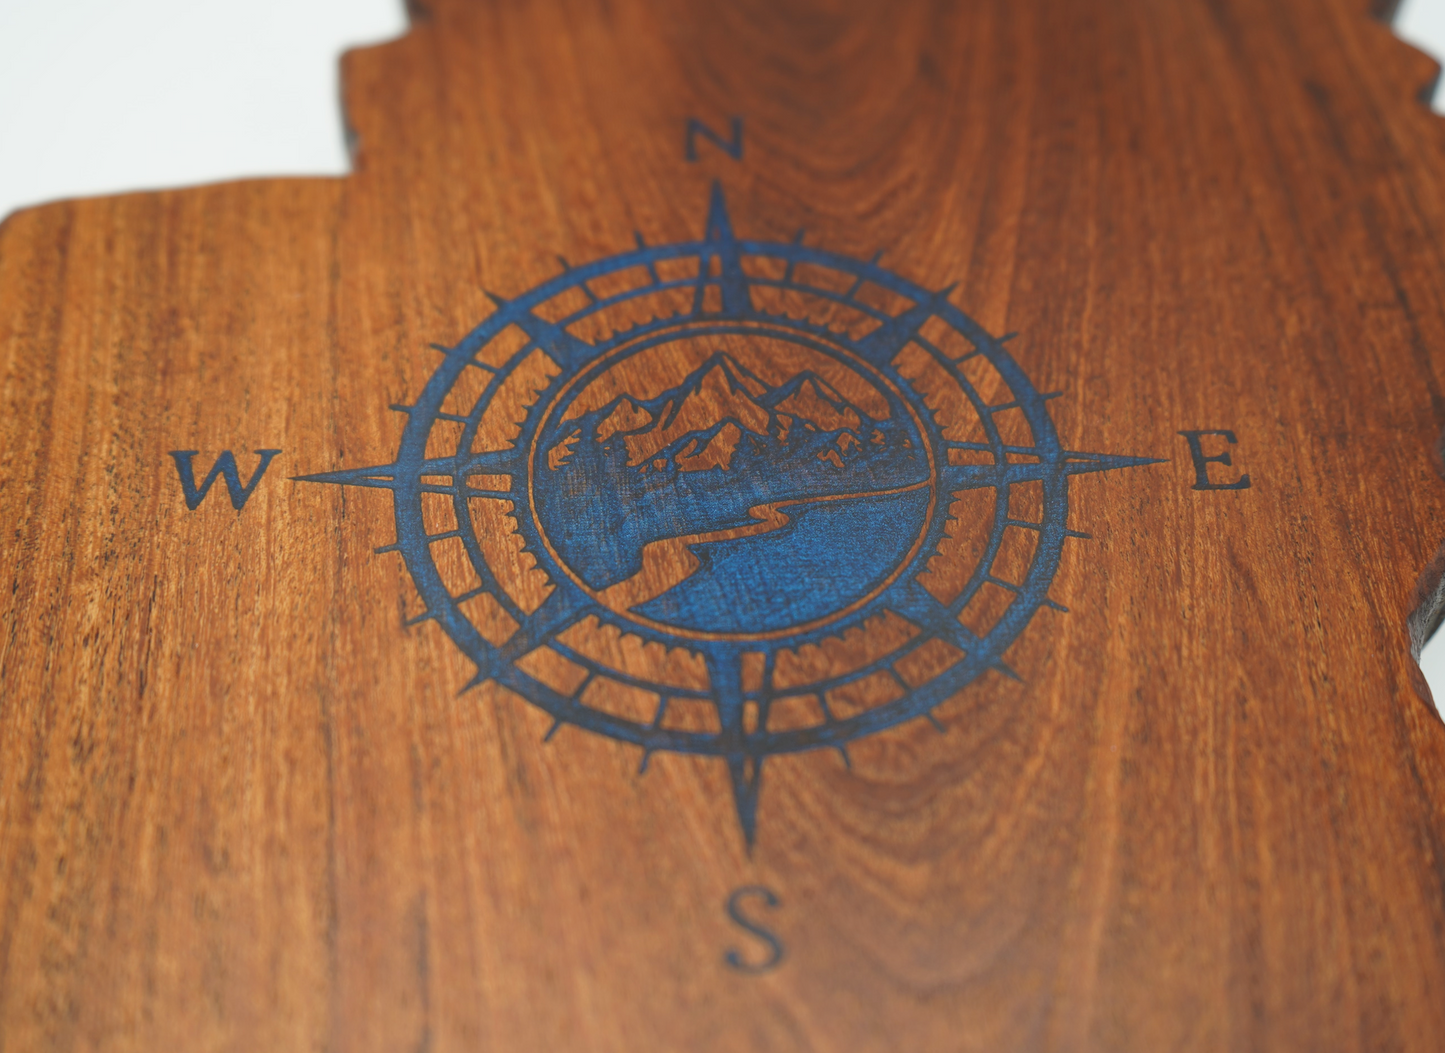 Lake Tahoe Shaped Charcuterie Board With Brilliant Blue resin Compass Design Made From Sapele wood